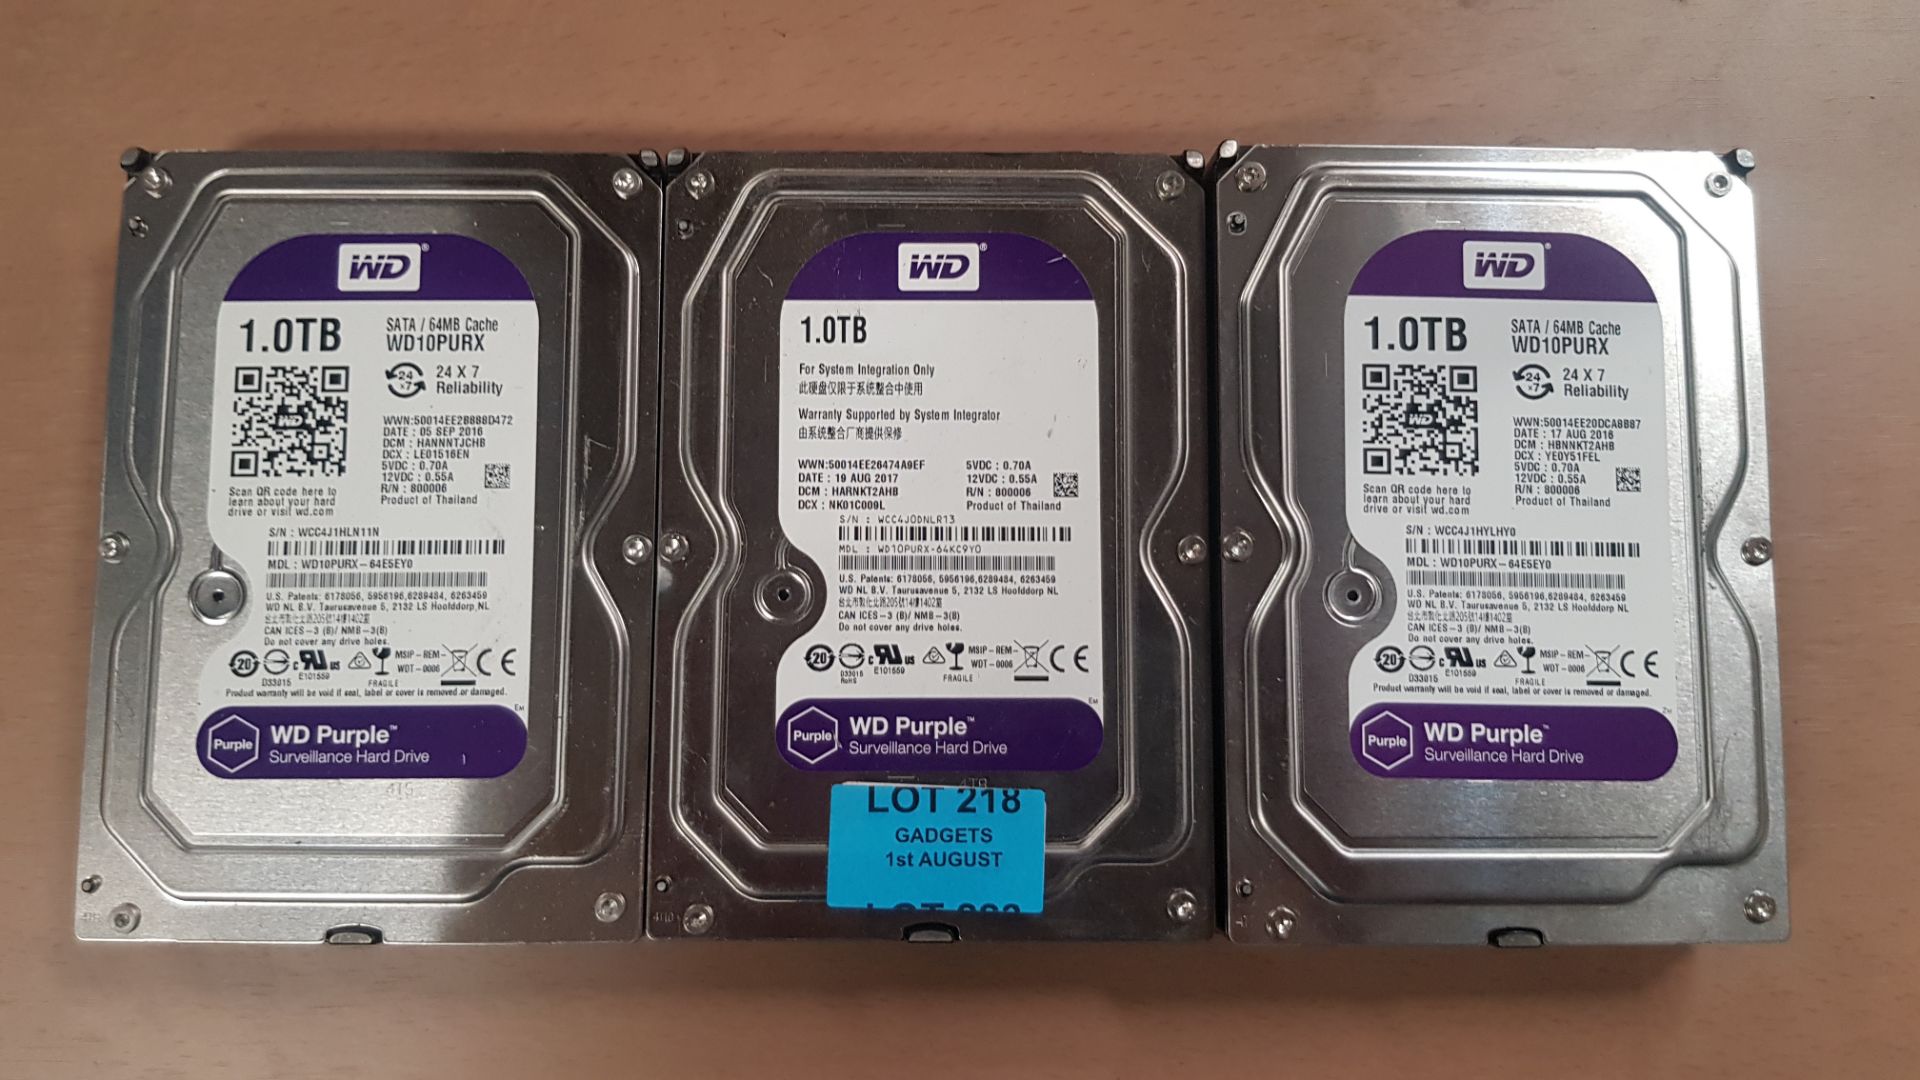 (R12) 3x 1.0 TB Toshiba External 3.5 SATA Hard Drive. (All Units Have Been Formatted). - Image 2 of 2